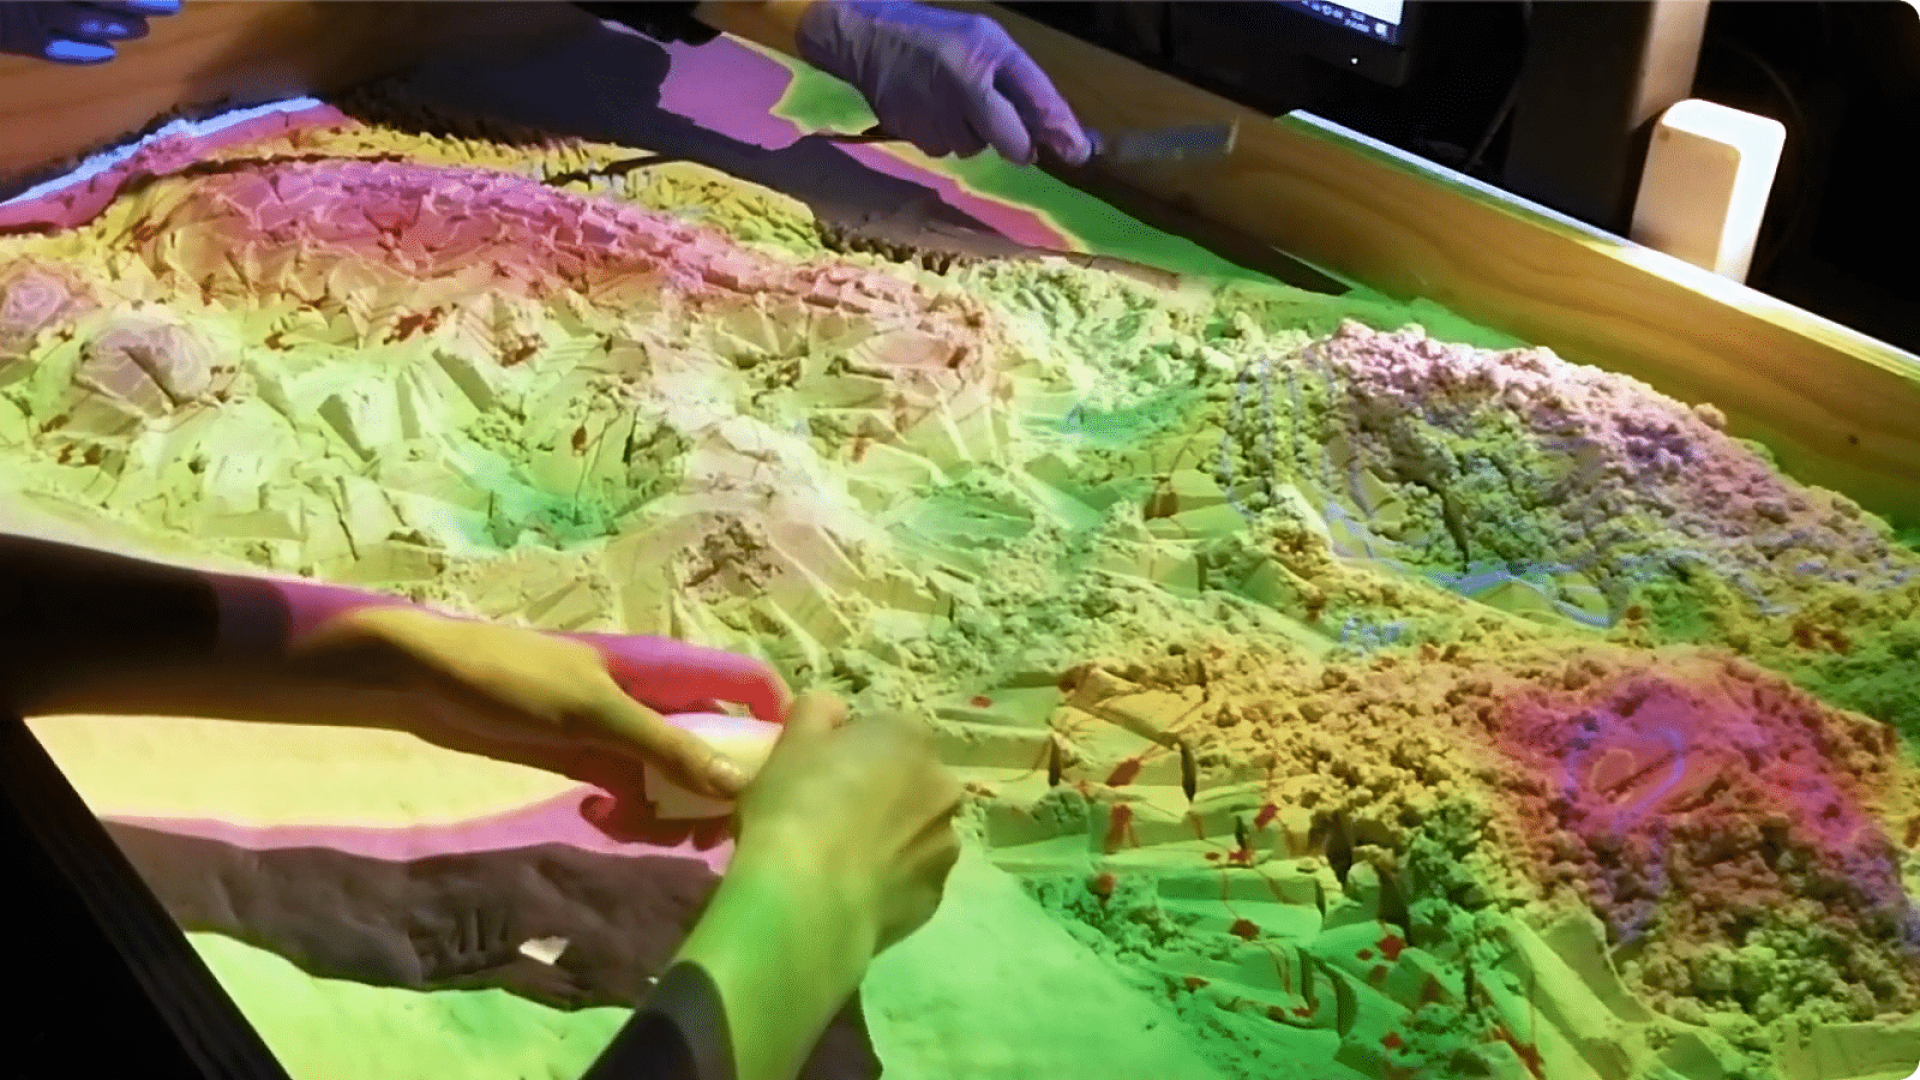 A pair of hands use a tool to shape a mass of sand in a table. A range of bright color gradients are projected atop the sand.